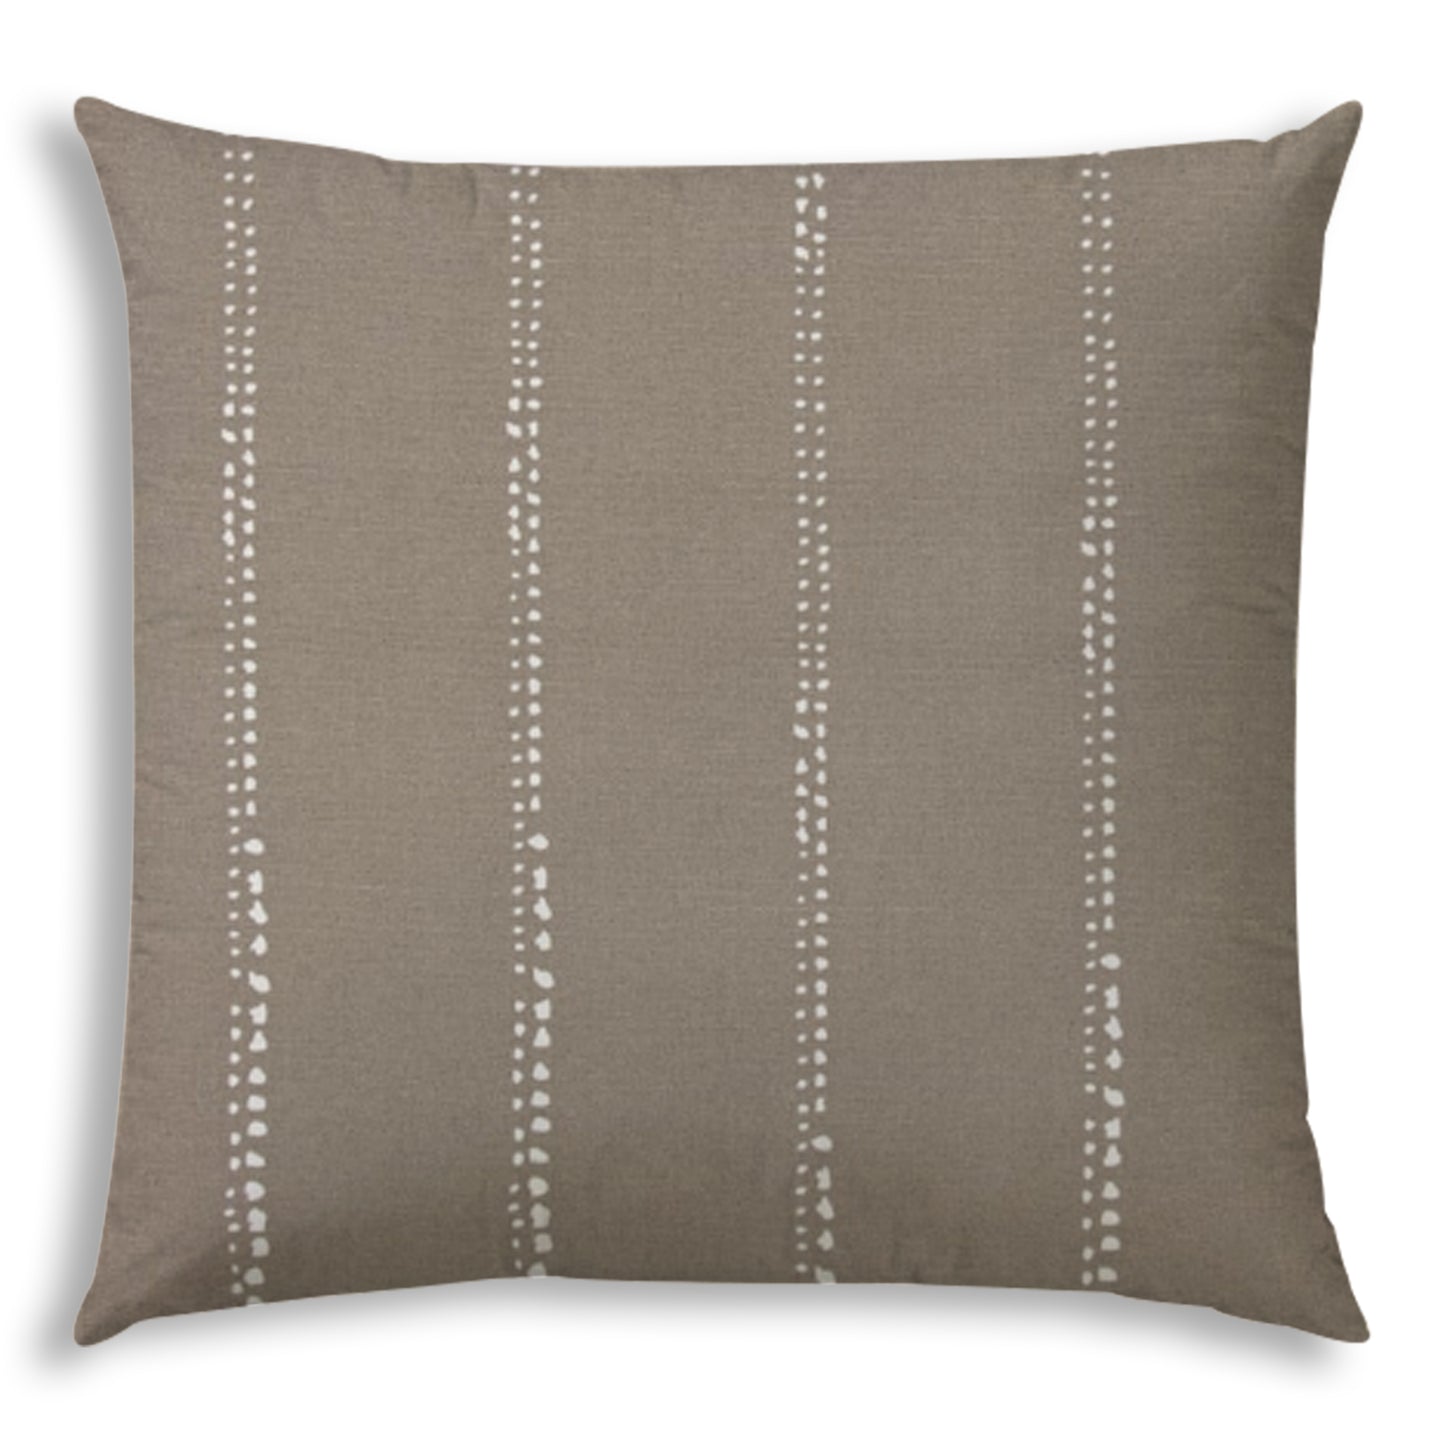 DRIZZLE Taupe Indoor/Outdoor Pillow - Sewn Closure